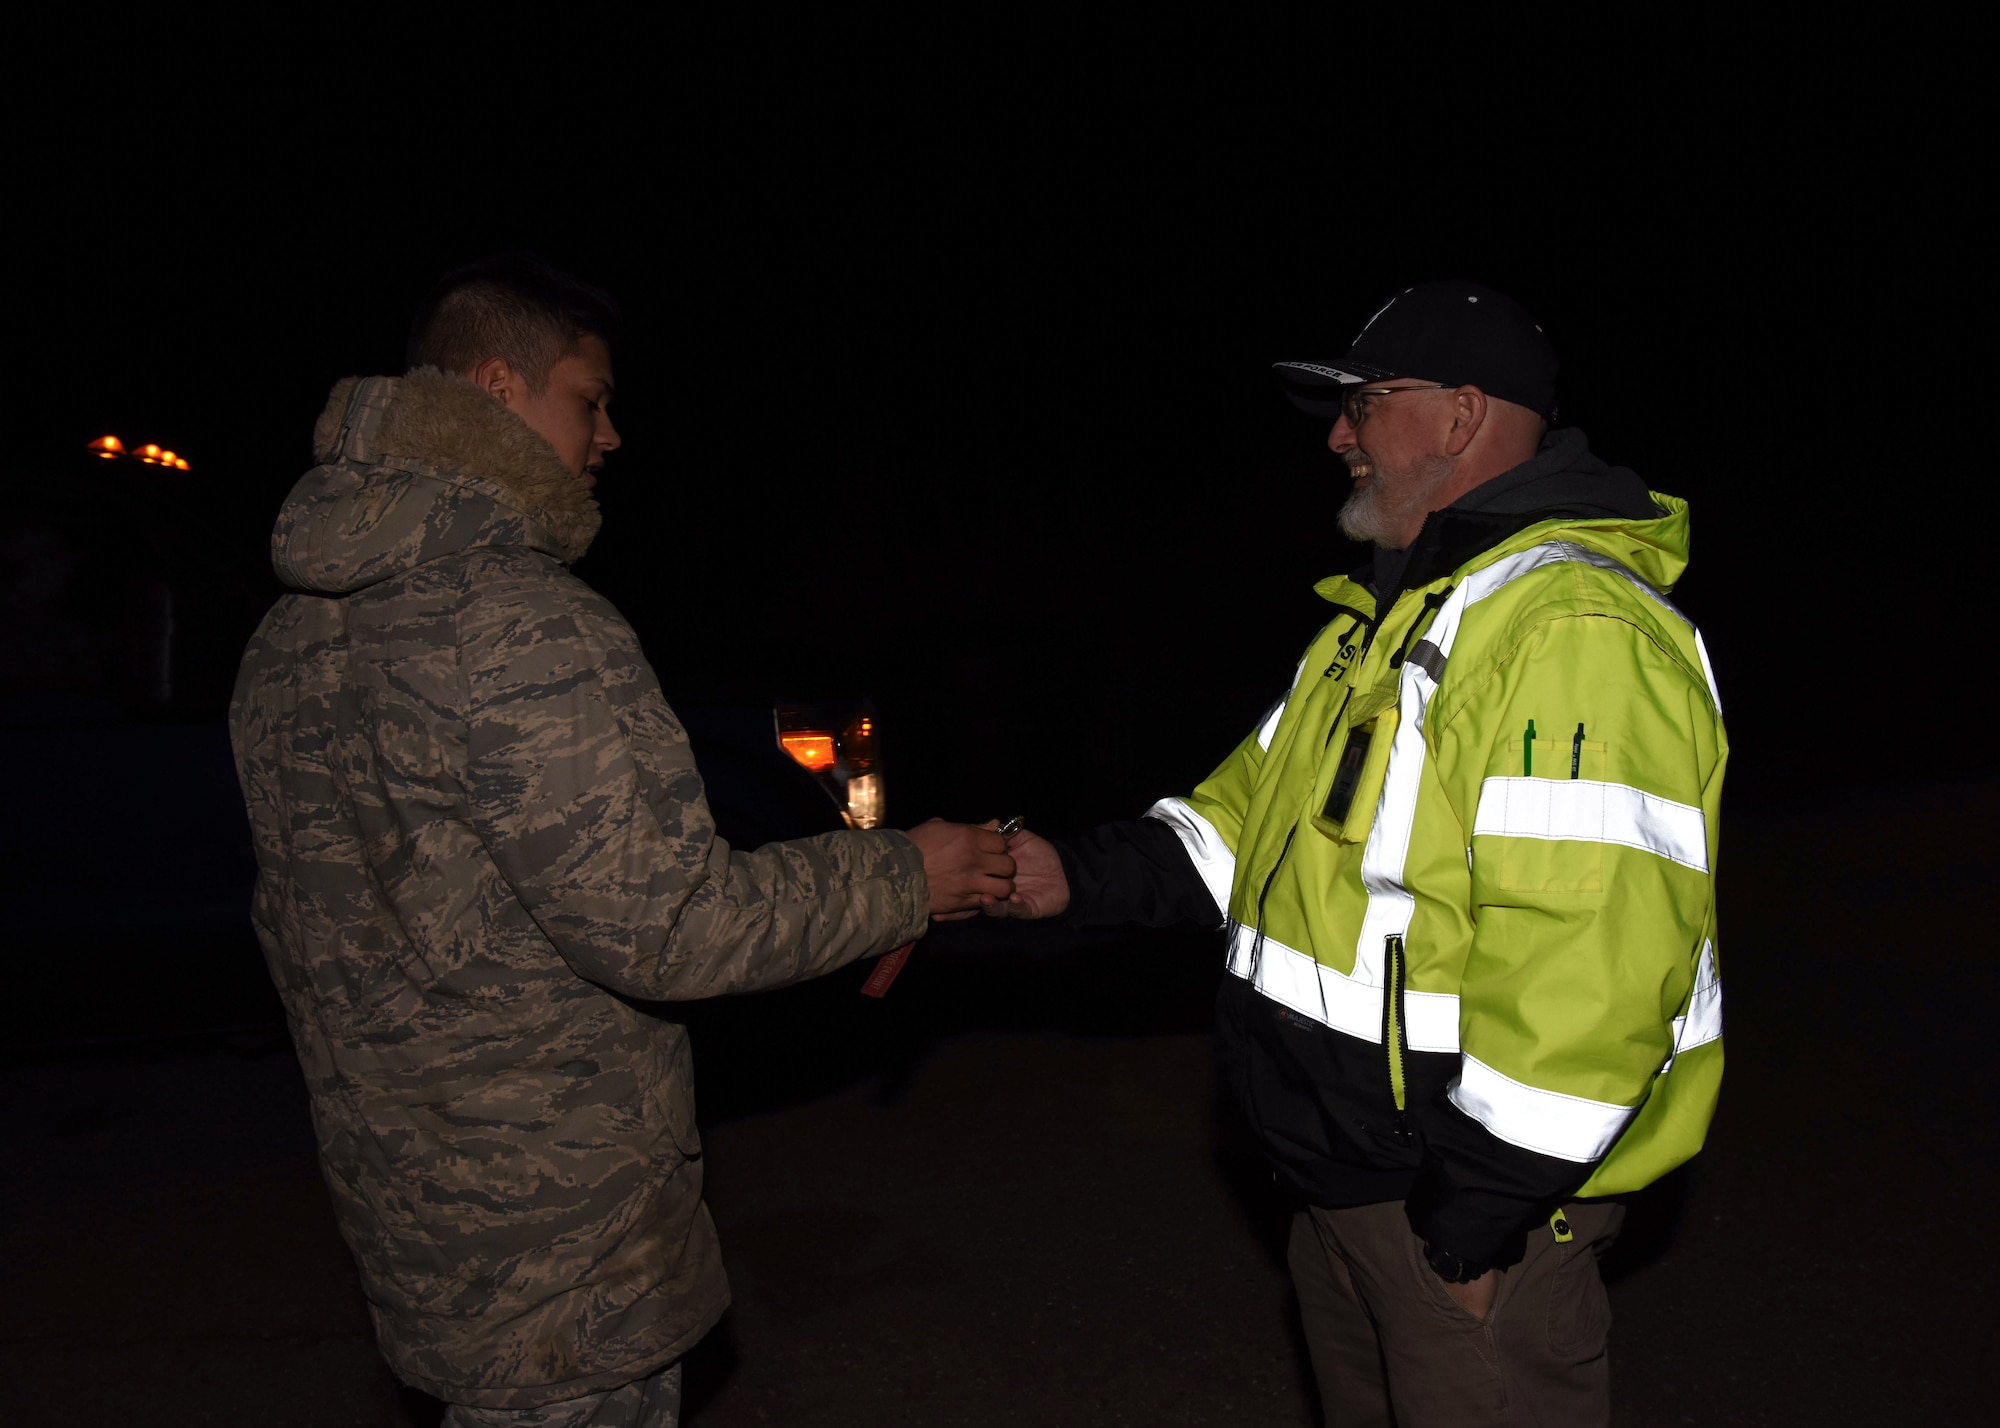 Airman from the 576th Flight Test Squadron hands over the launch facility keys to Jason Porter, 30th Space Wing Safety Office operation safety technician Feb. 5, 2019 at Vandenberg Air Force Base, Calif. Porter will report back to the fallback site and continue his other duties prior to launch. (U.S. Air Force photo by Airman 1st Class Aubree Milks)